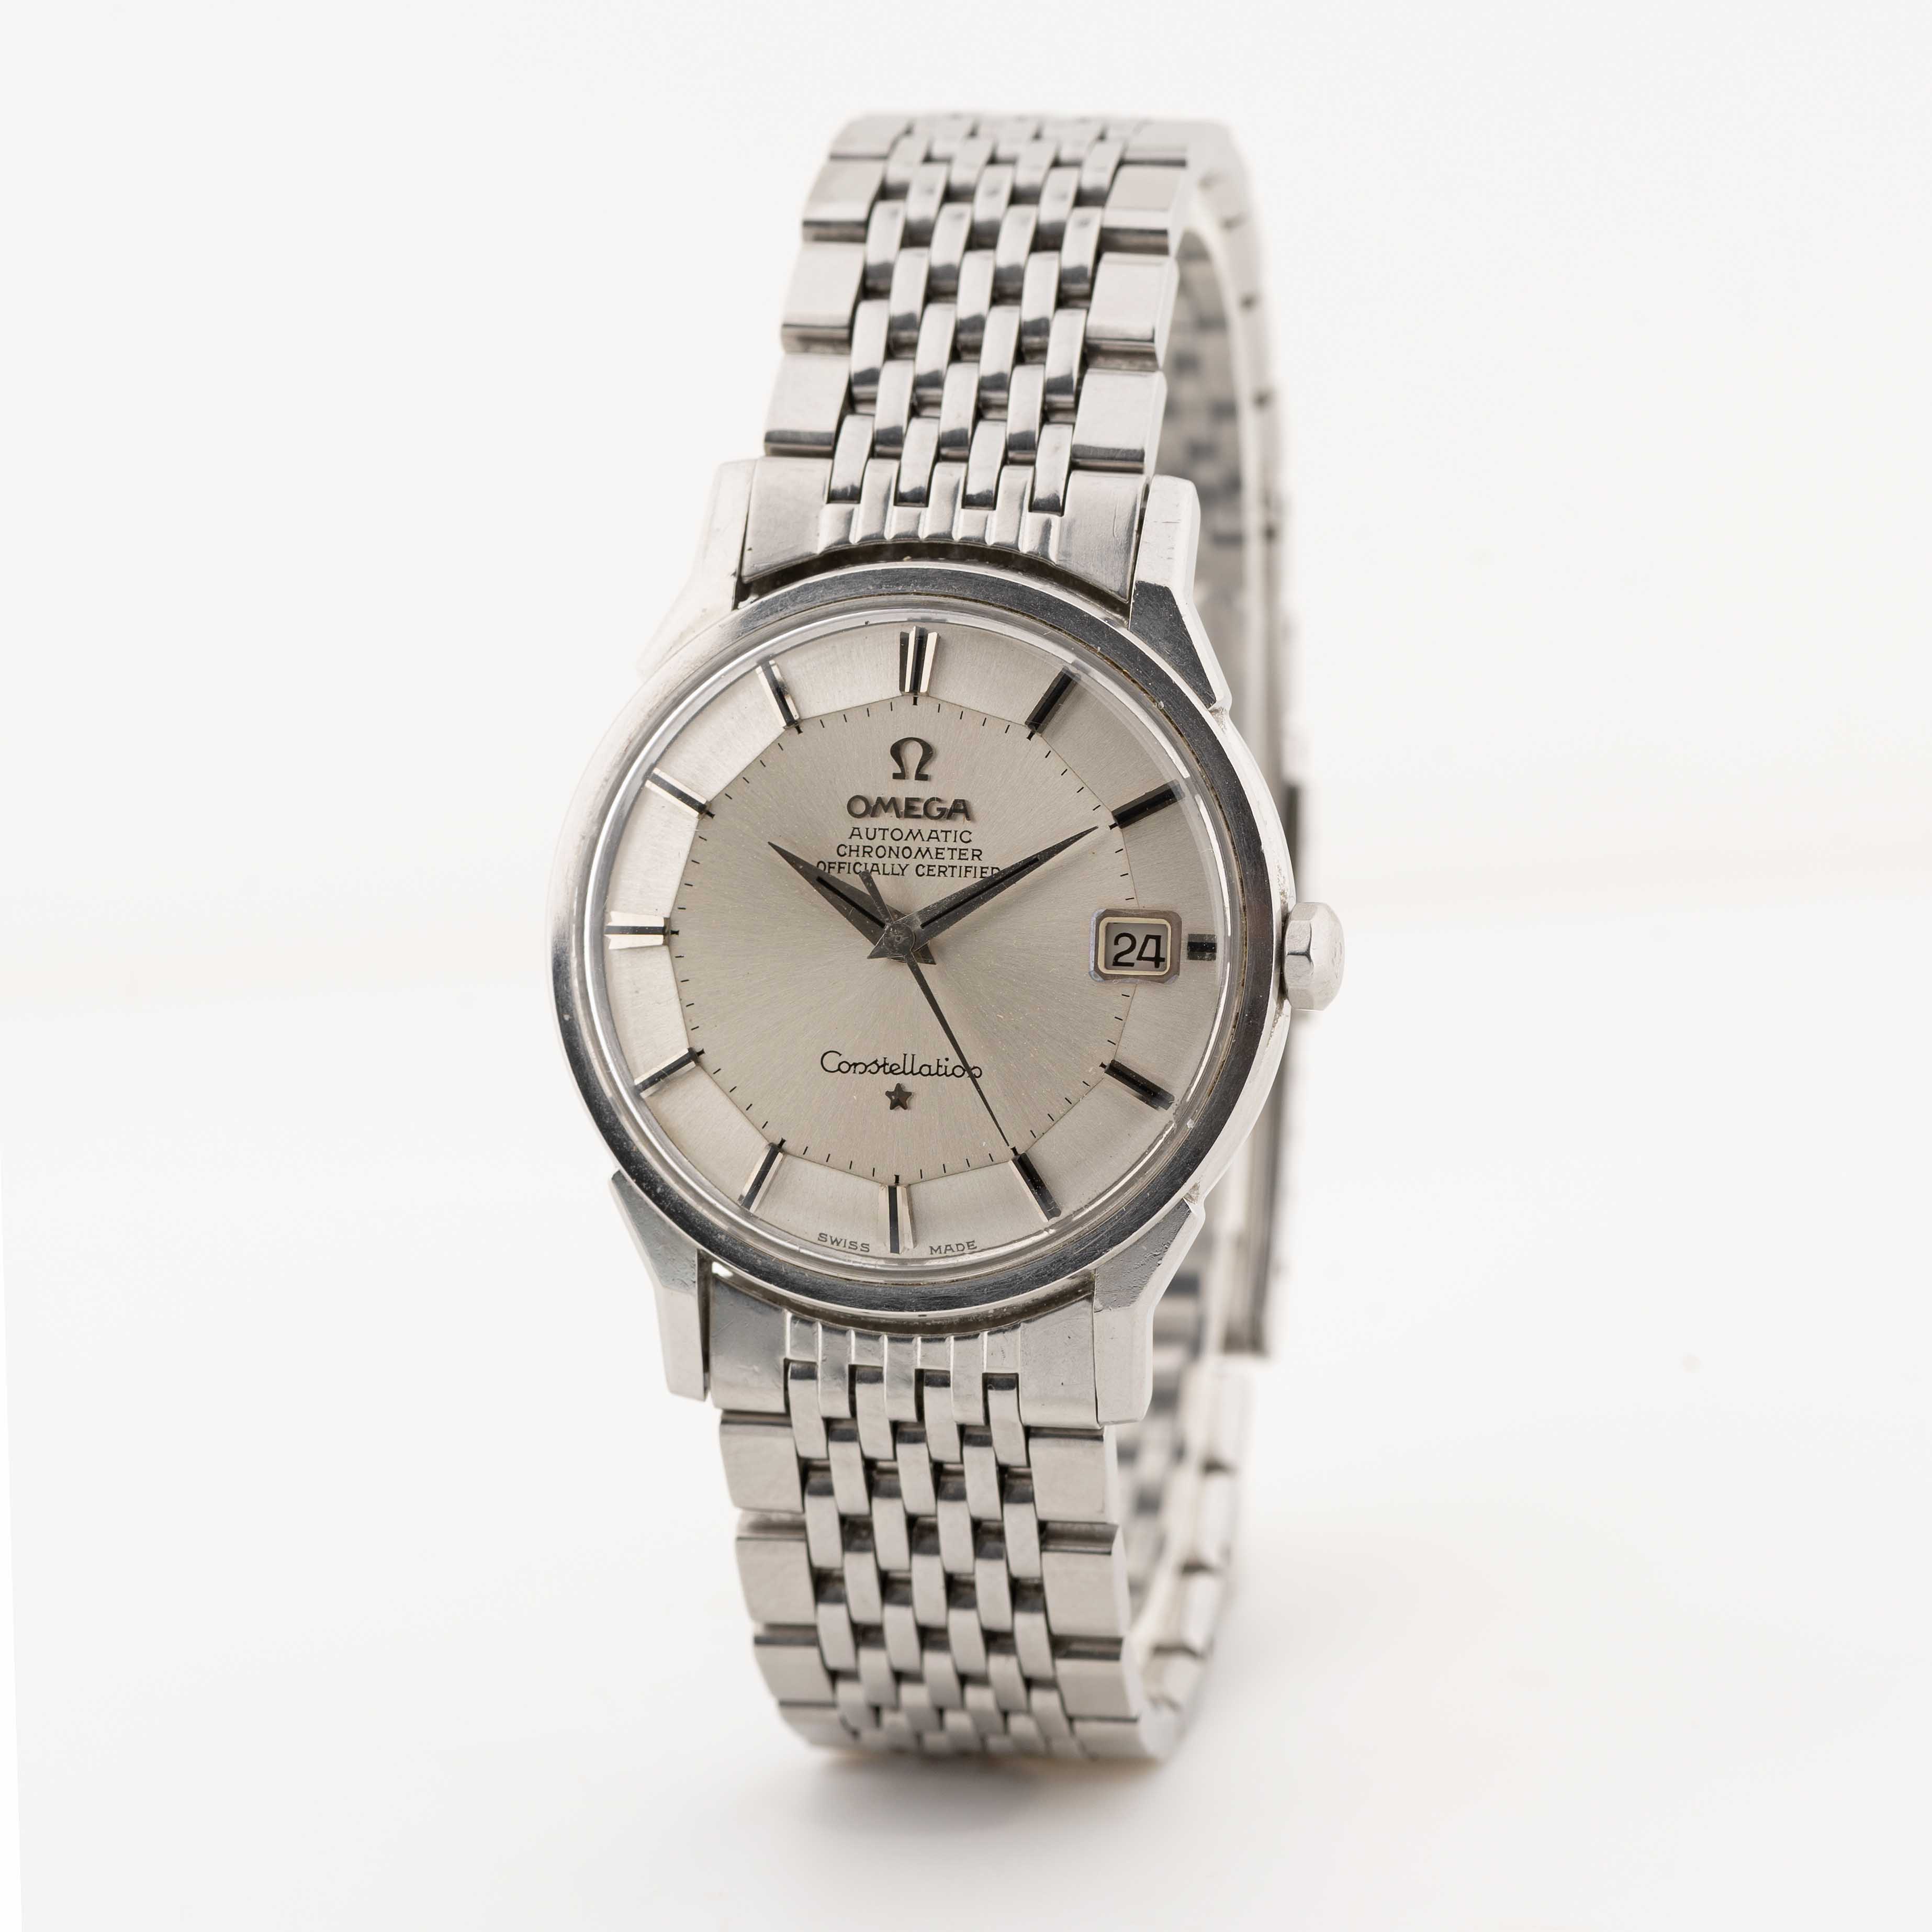 A GENTLEMAN'S STAINLESS STEEL OMEGA CONSTELLATION CHRONOMETER BRACELET WATCH CIRCA 1963, REF. 168. - Image 4 of 11